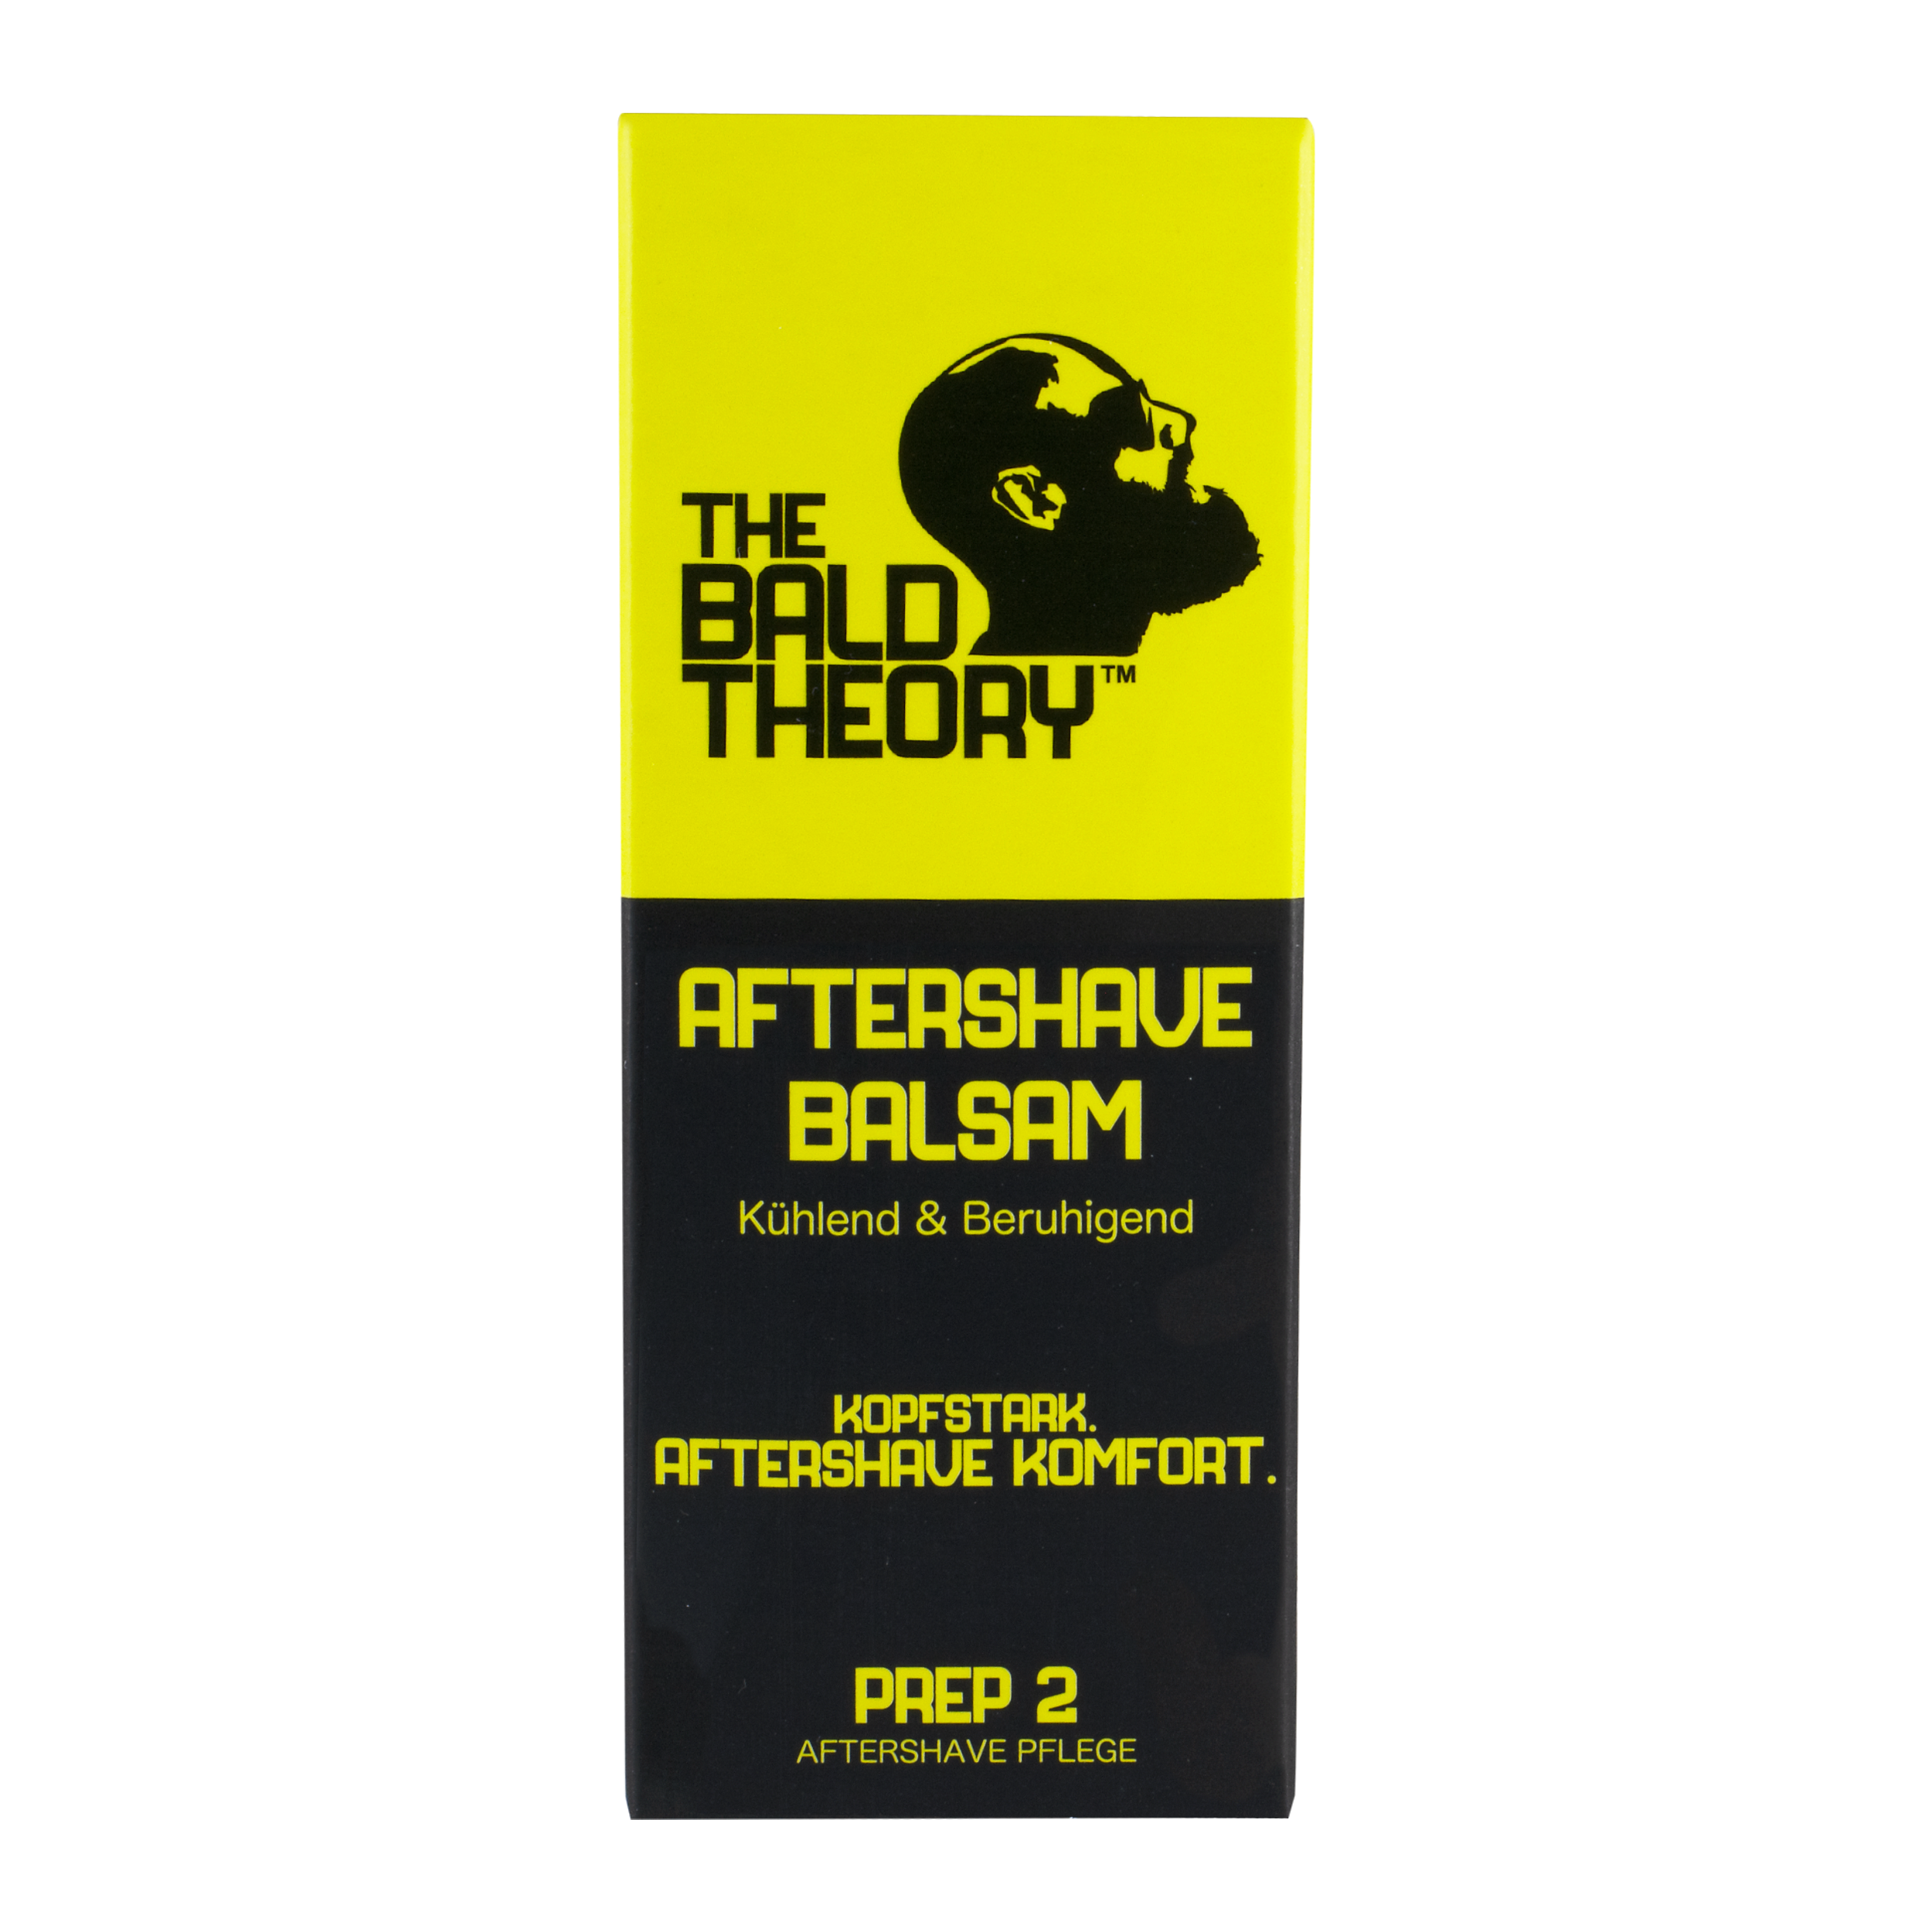 THE BALD THEORY Aftershave Relief Balm